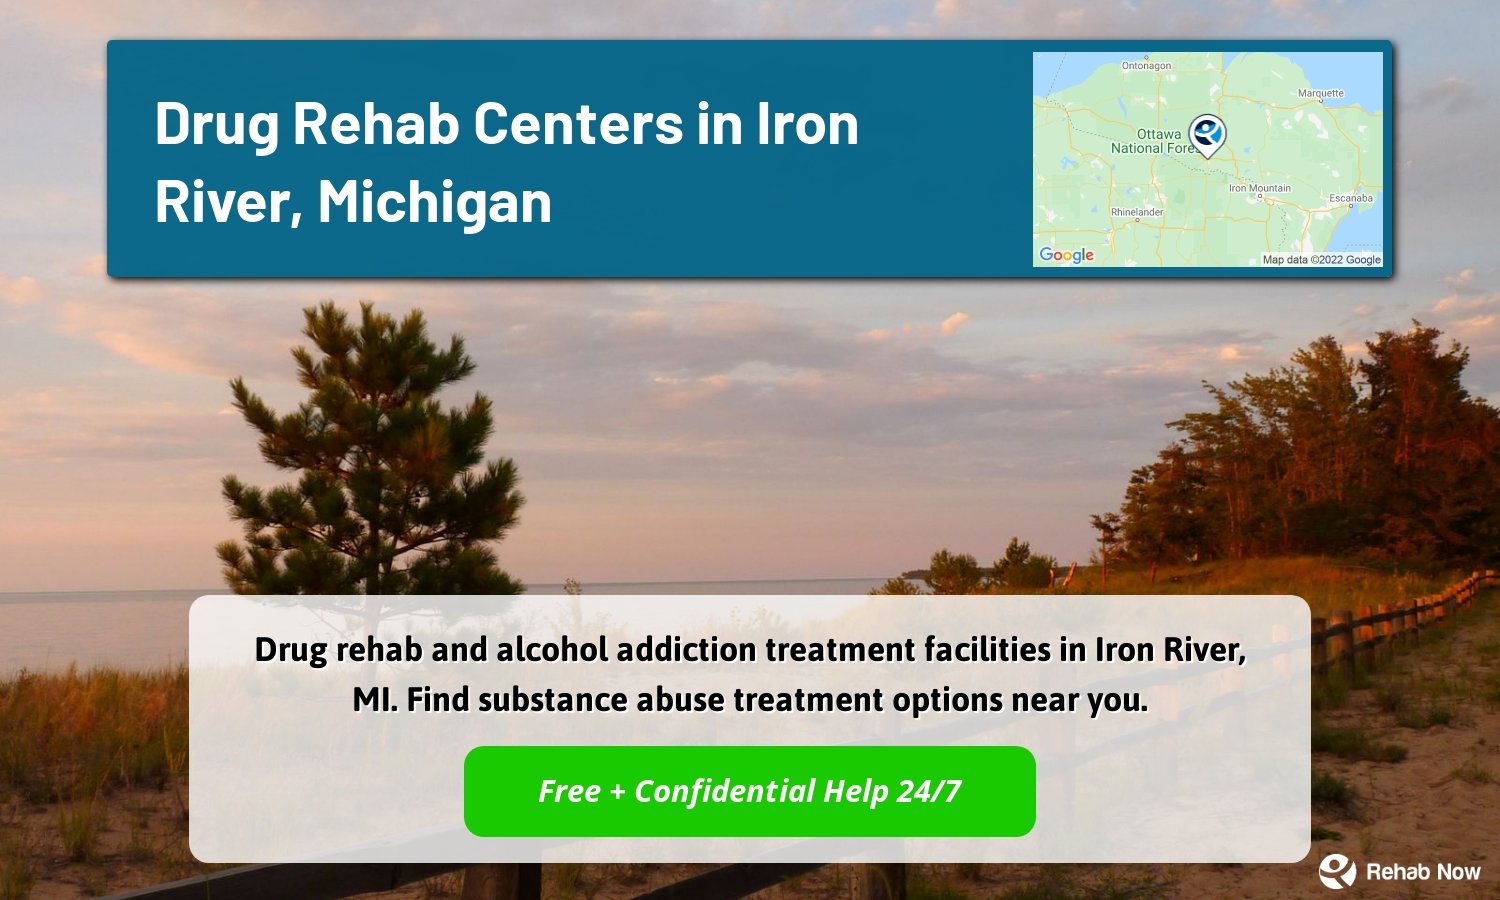 Drug rehab and alcohol addiction treatment facilities in Iron River, MI. Find substance abuse treatment options near you.